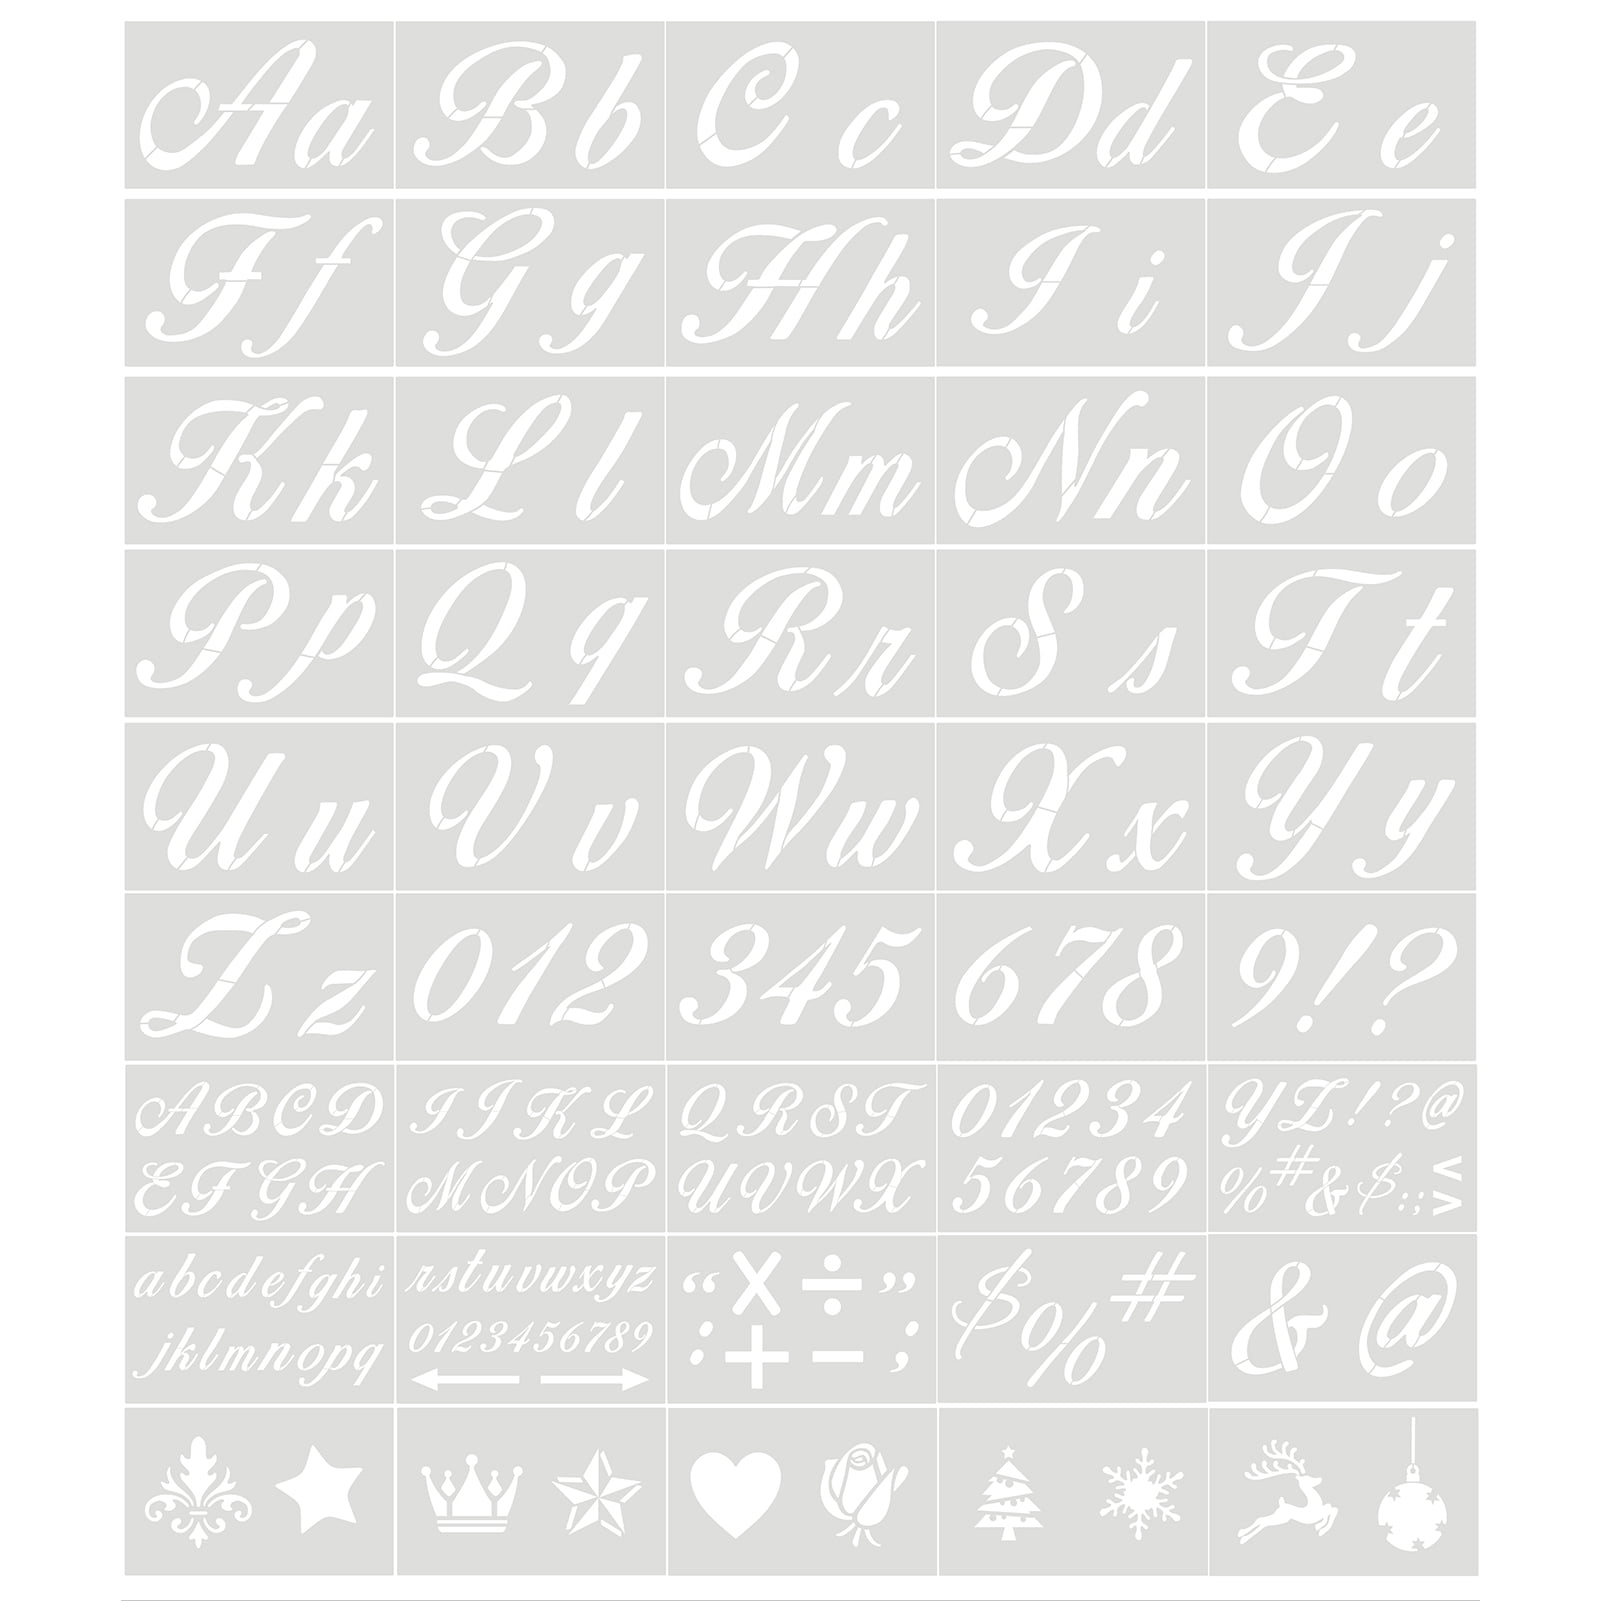 Boutique Calligraphy Stencil Template Kit - 45 Reusable Pieces - Includes  Lettering Upper and Lowercase both Large and Small, Numbers, Punctuation,  Laurels and Flowers - For Arts Crafts Painting Wood Calligraphy Stencils